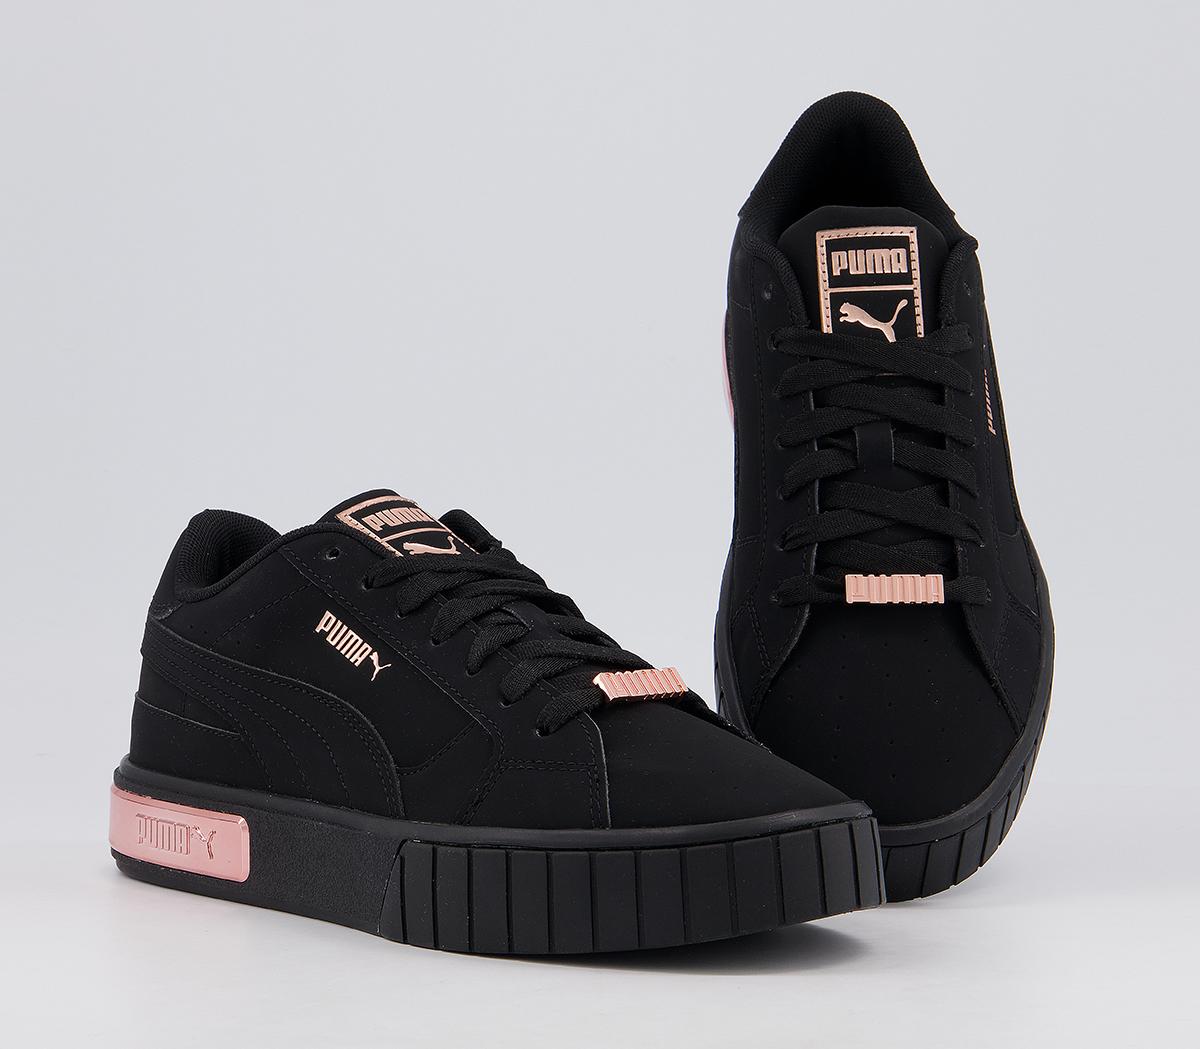 PUMA Cali Star Trainers Black Rose Gold Exclusive - Women's Trainers